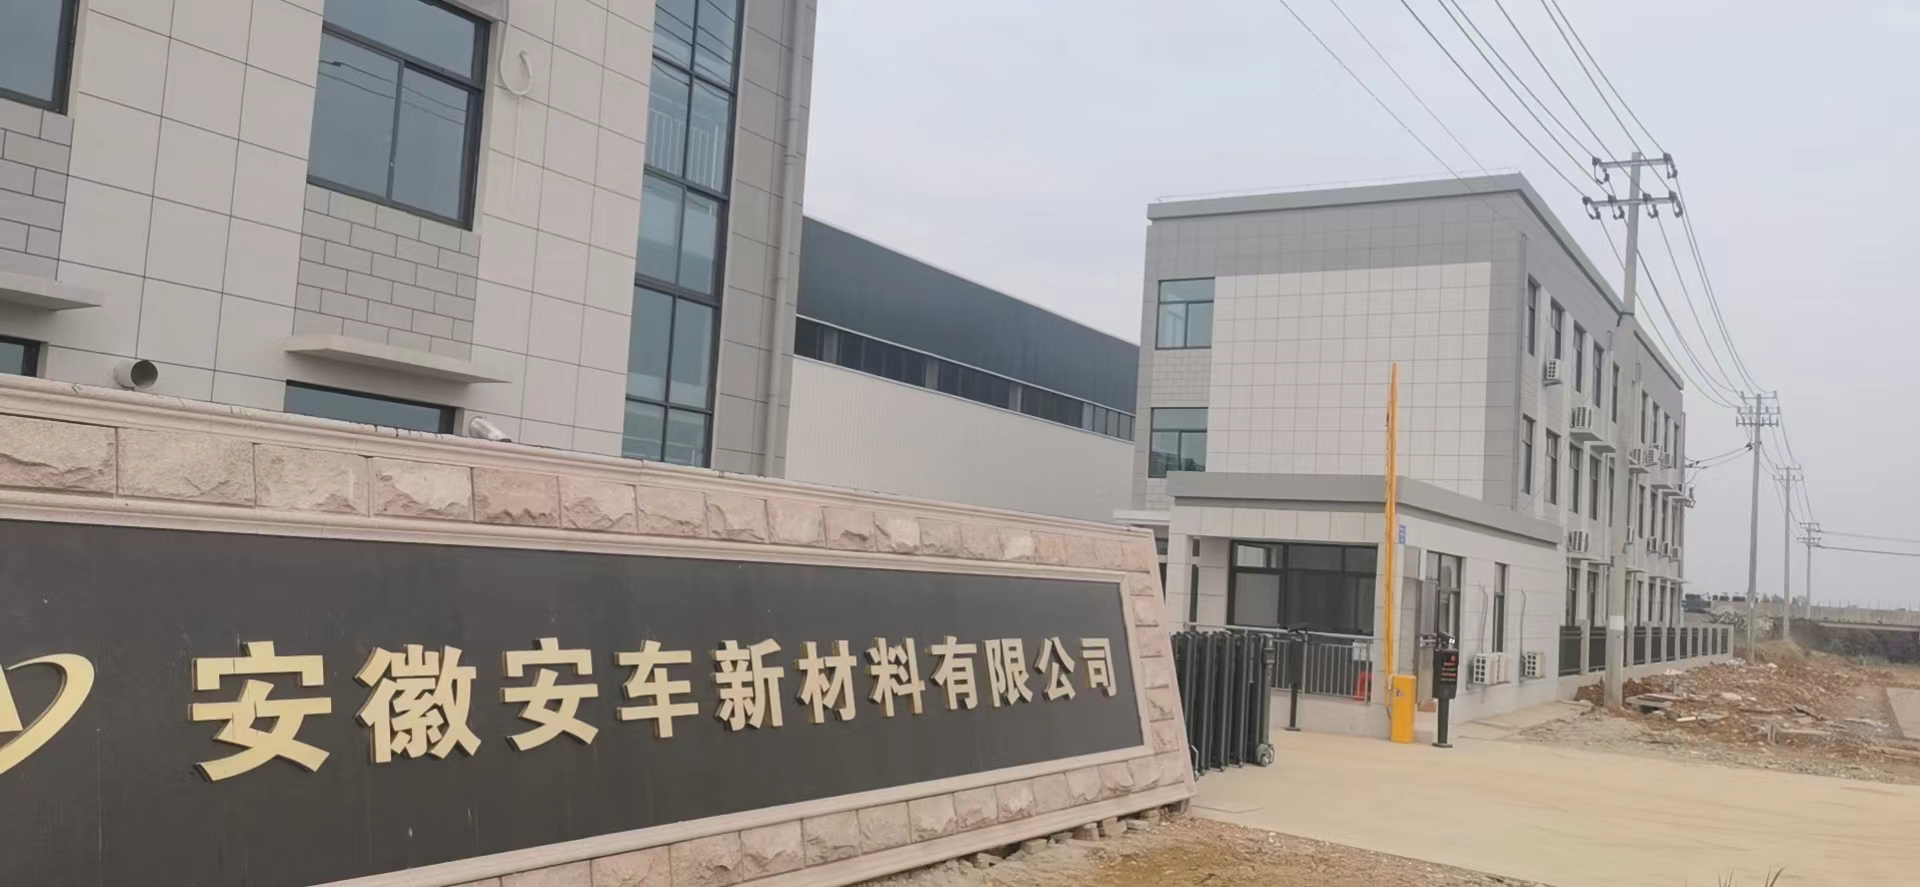 AnChe New material Co., Ltd. moved into the new factory